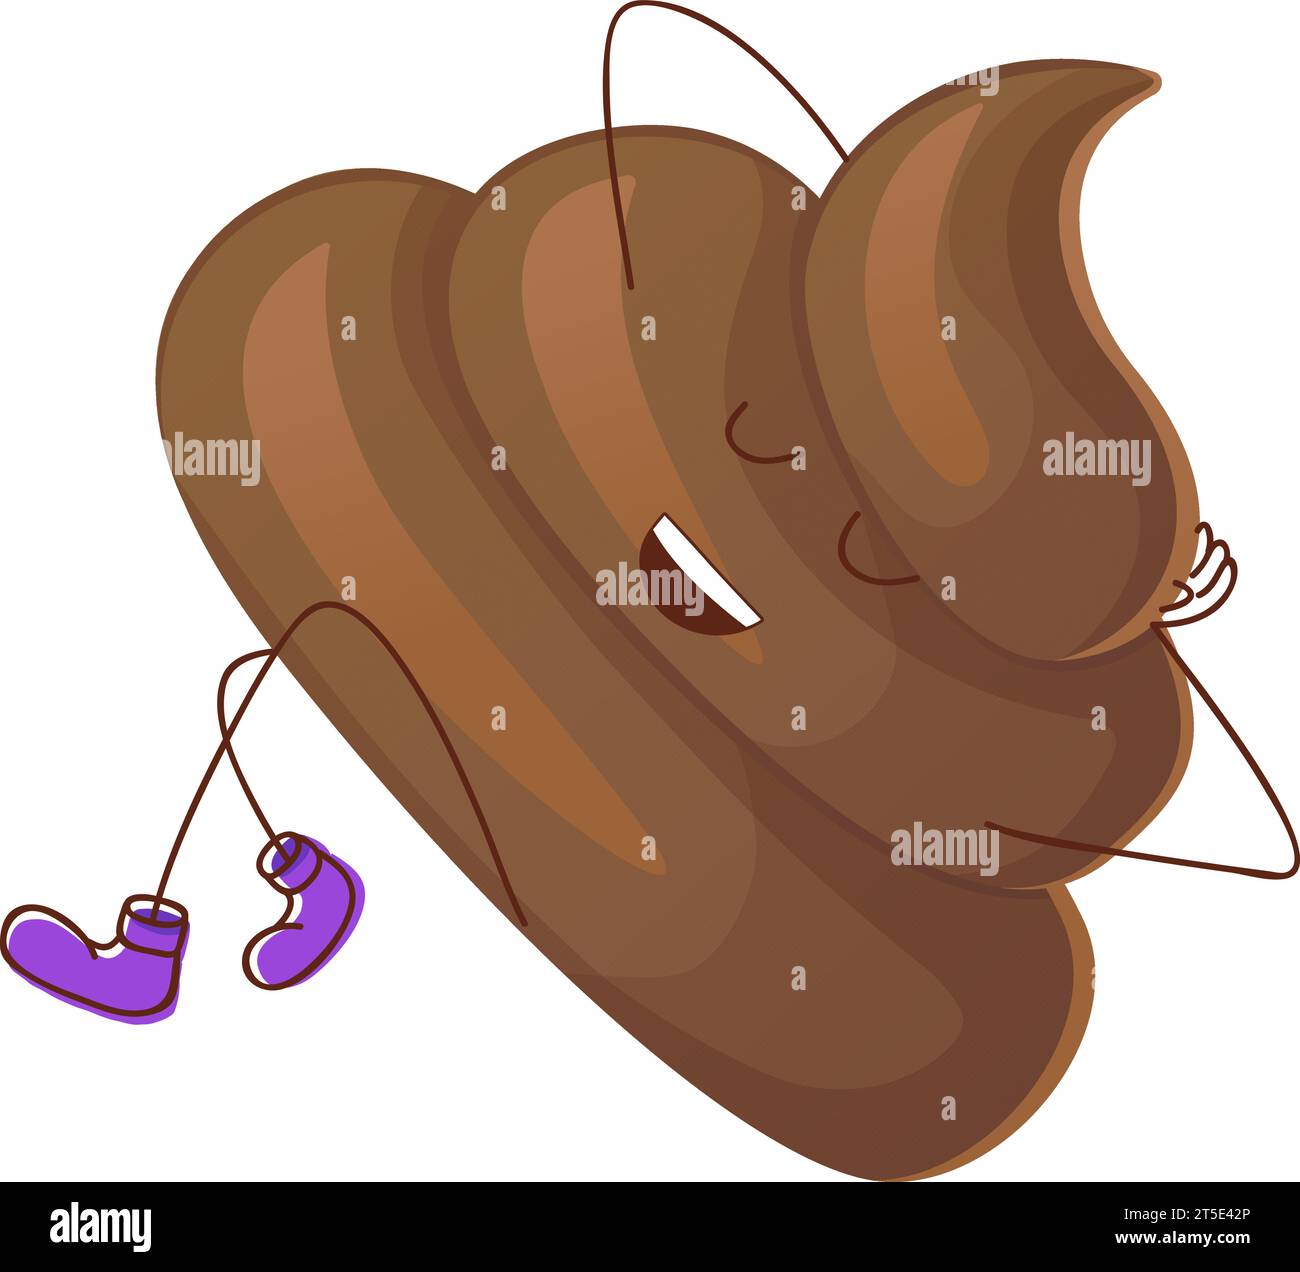 Poop ironic A self-assured character radiating satisfaction with life. Stock Vector